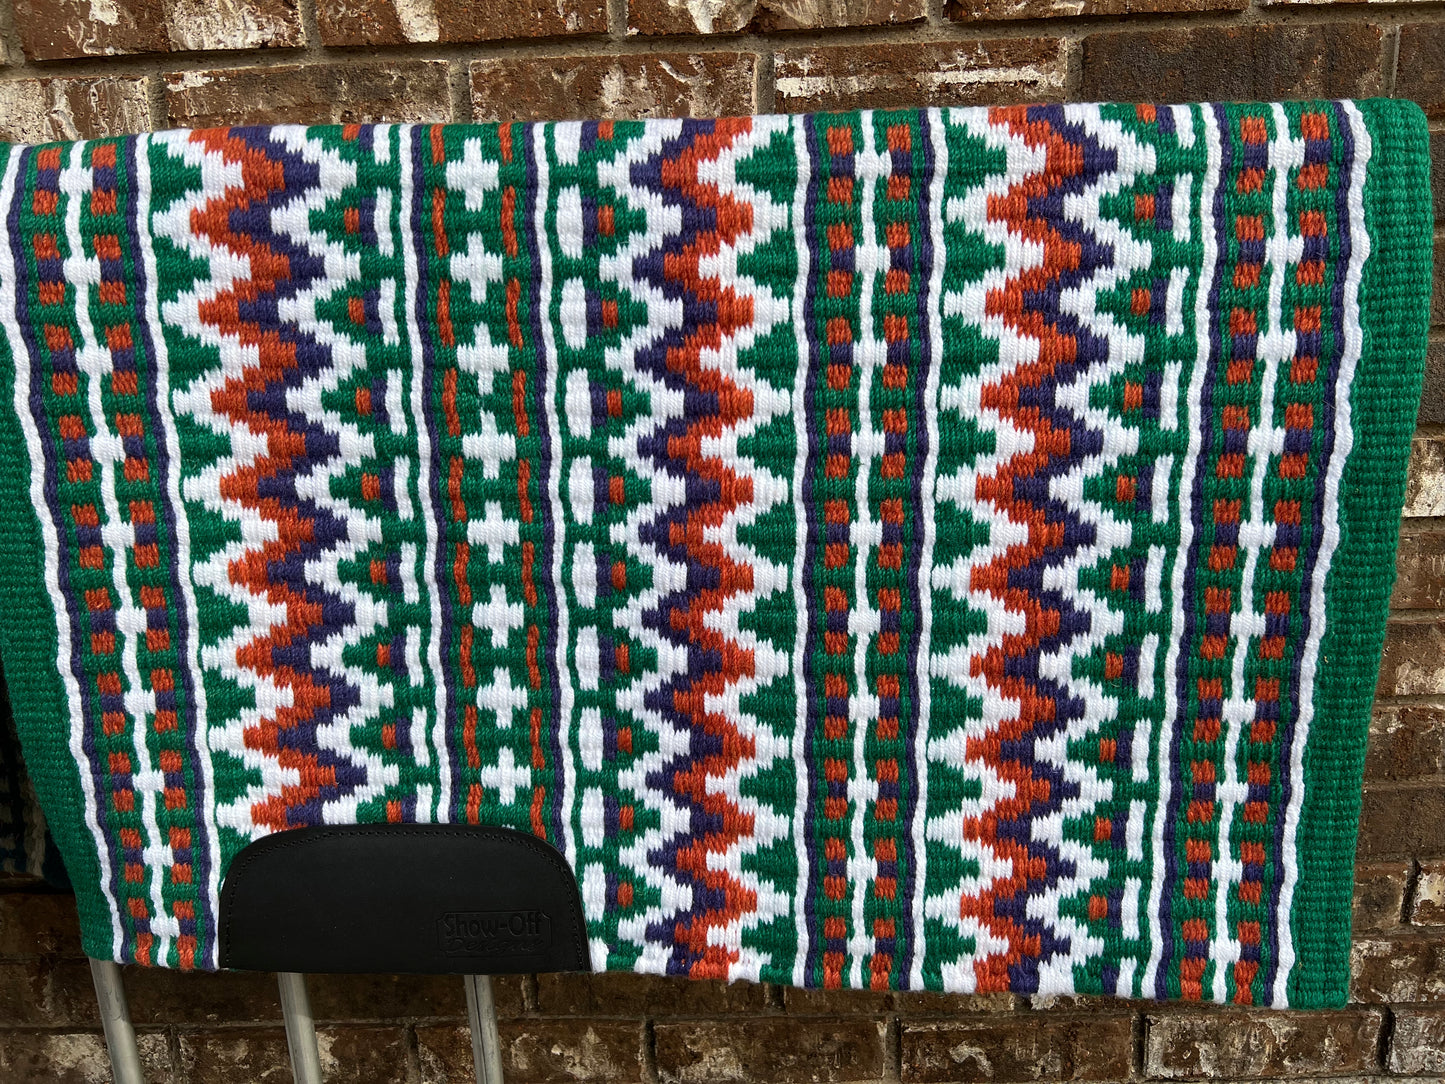 146. Saddle blanket oversized 34x42 with wear leathers and carry case